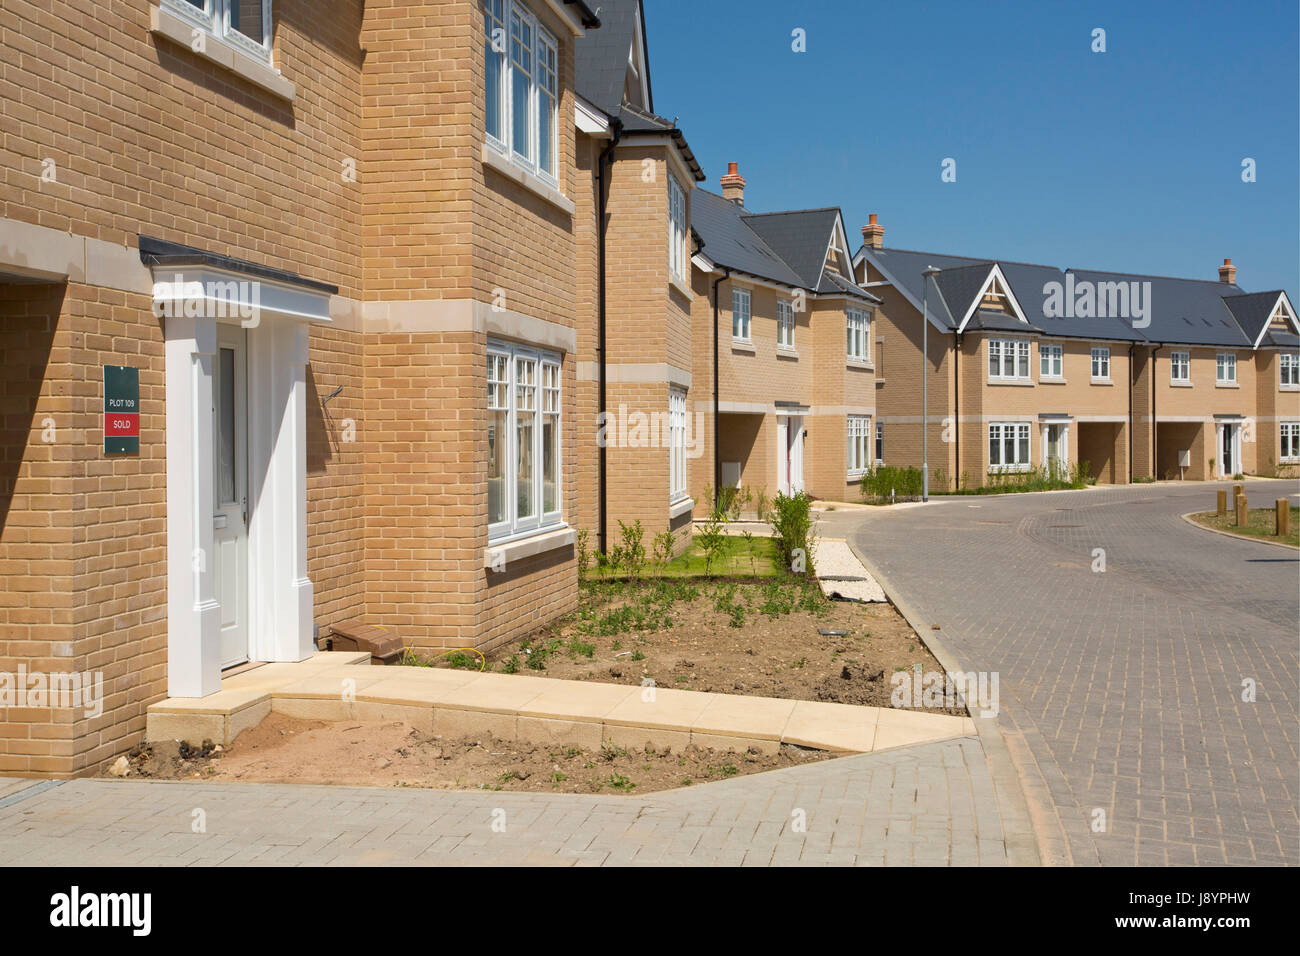 An empty street in a mostly complete new housing development, with houses sold before completion Stock Photo